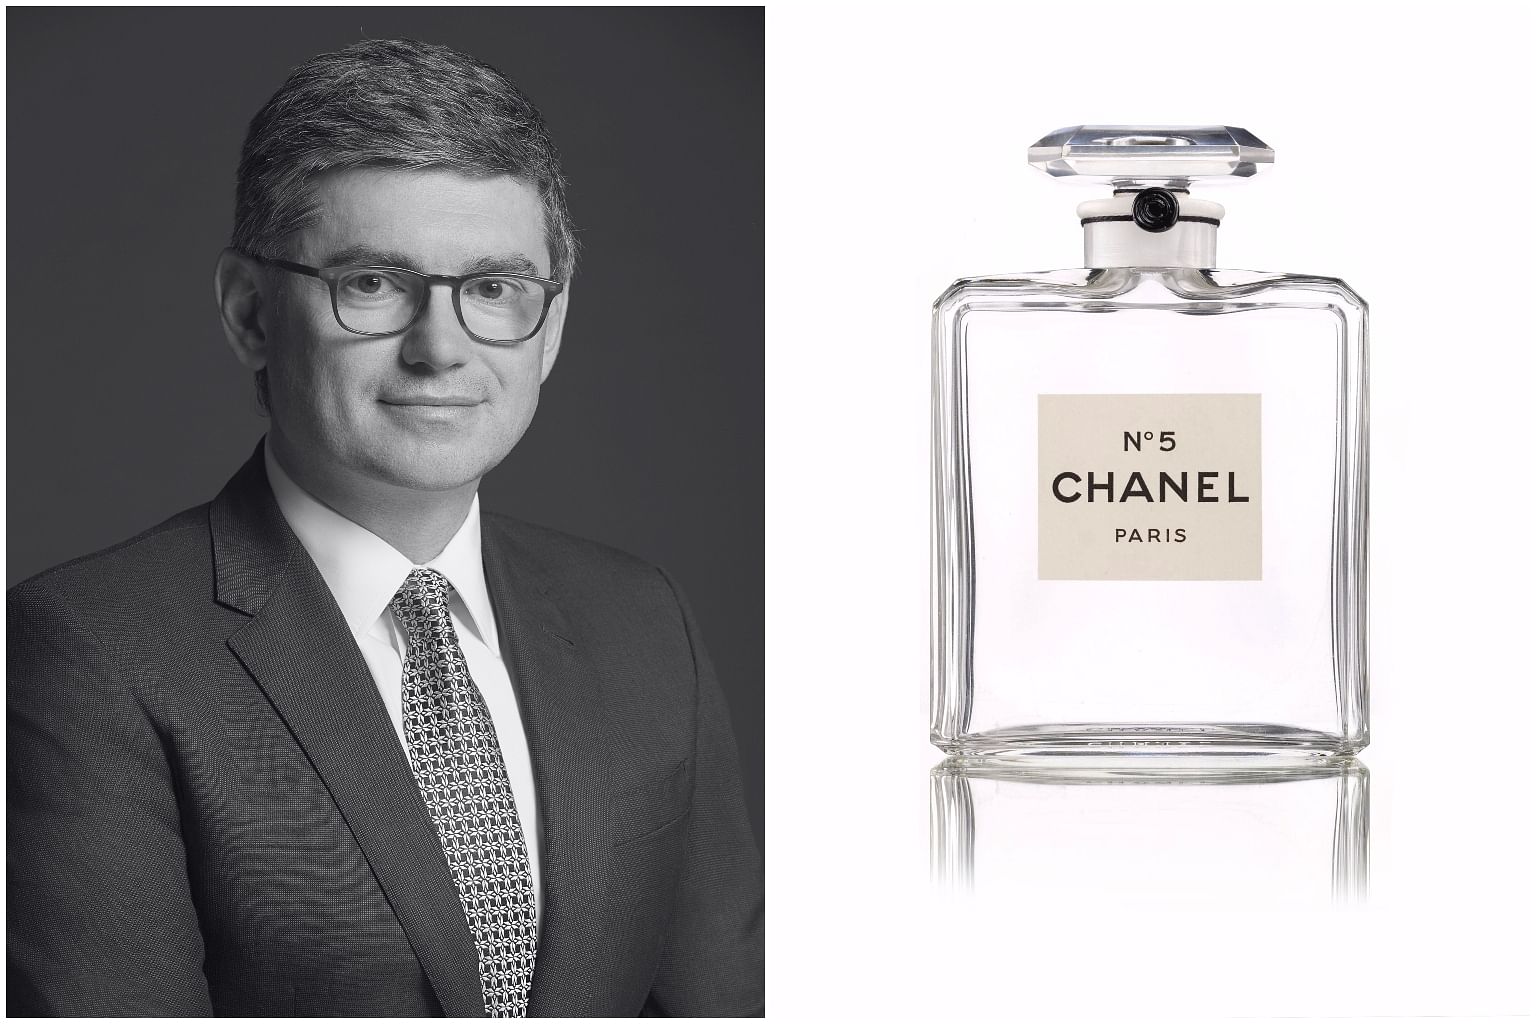 100th Anniversary of Chanel No. 5, the classic fragrance from Coco